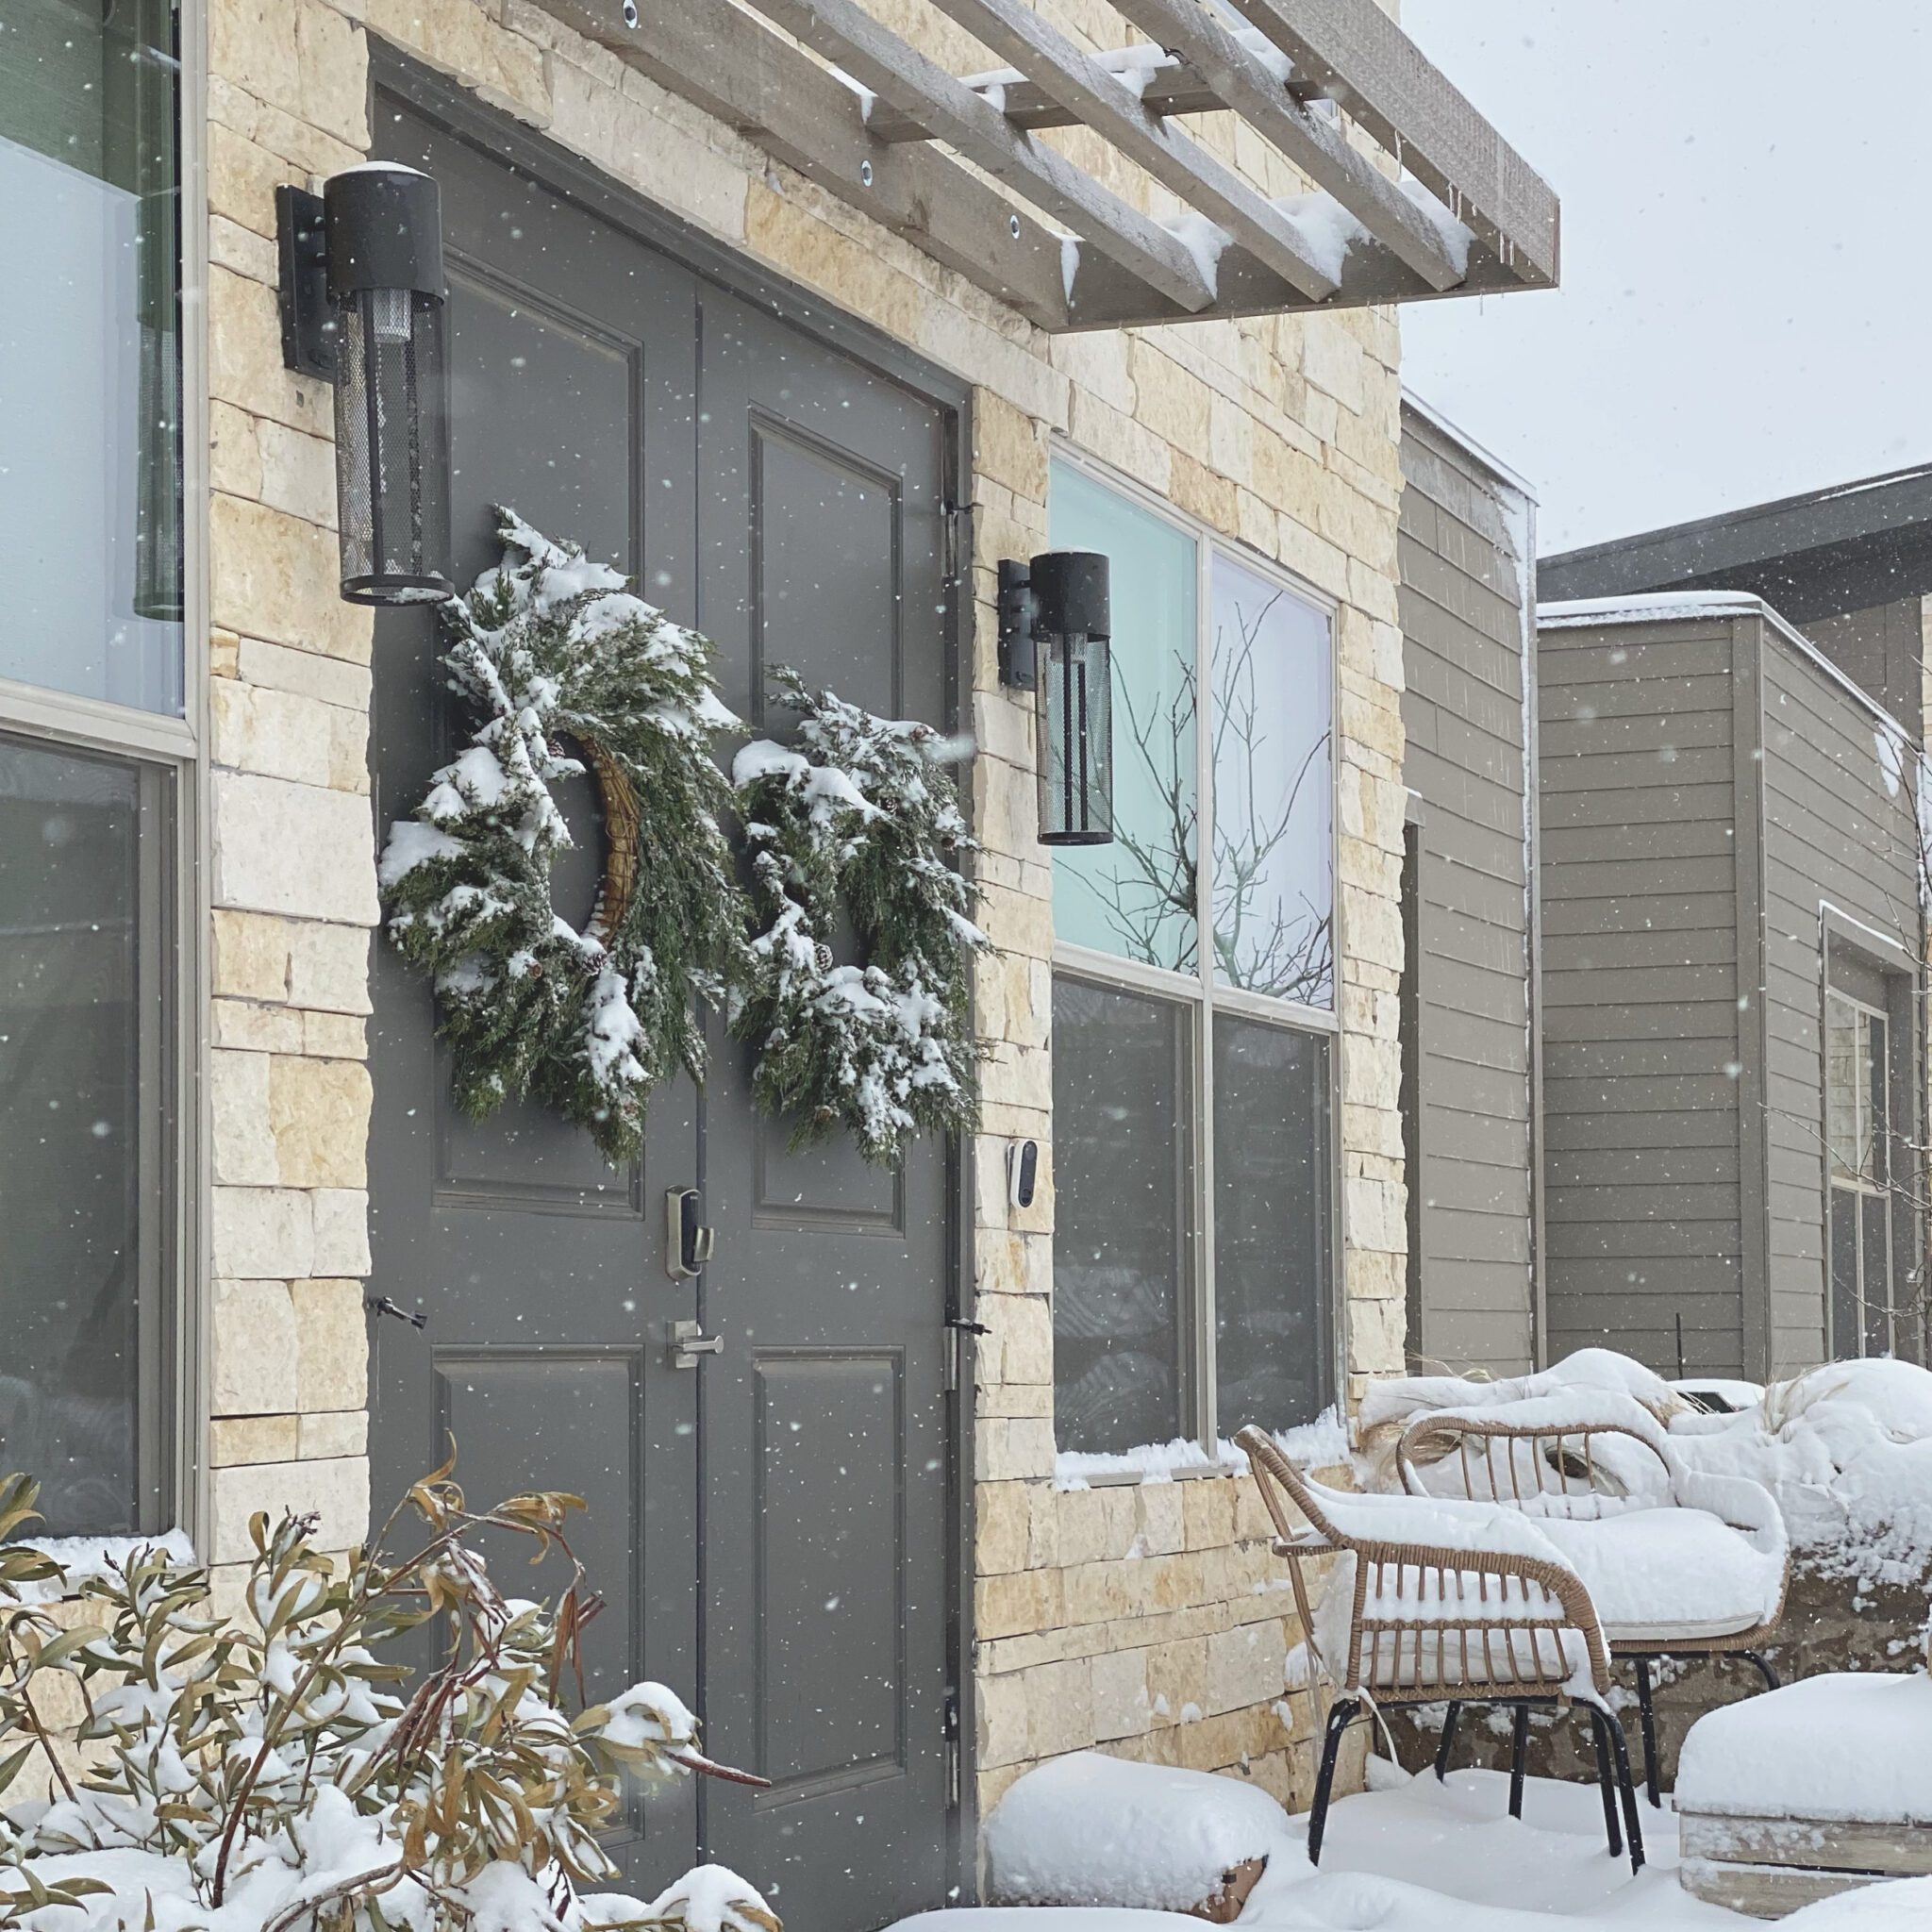 How to Prepare Your Apartment for Winter Weather Advisories